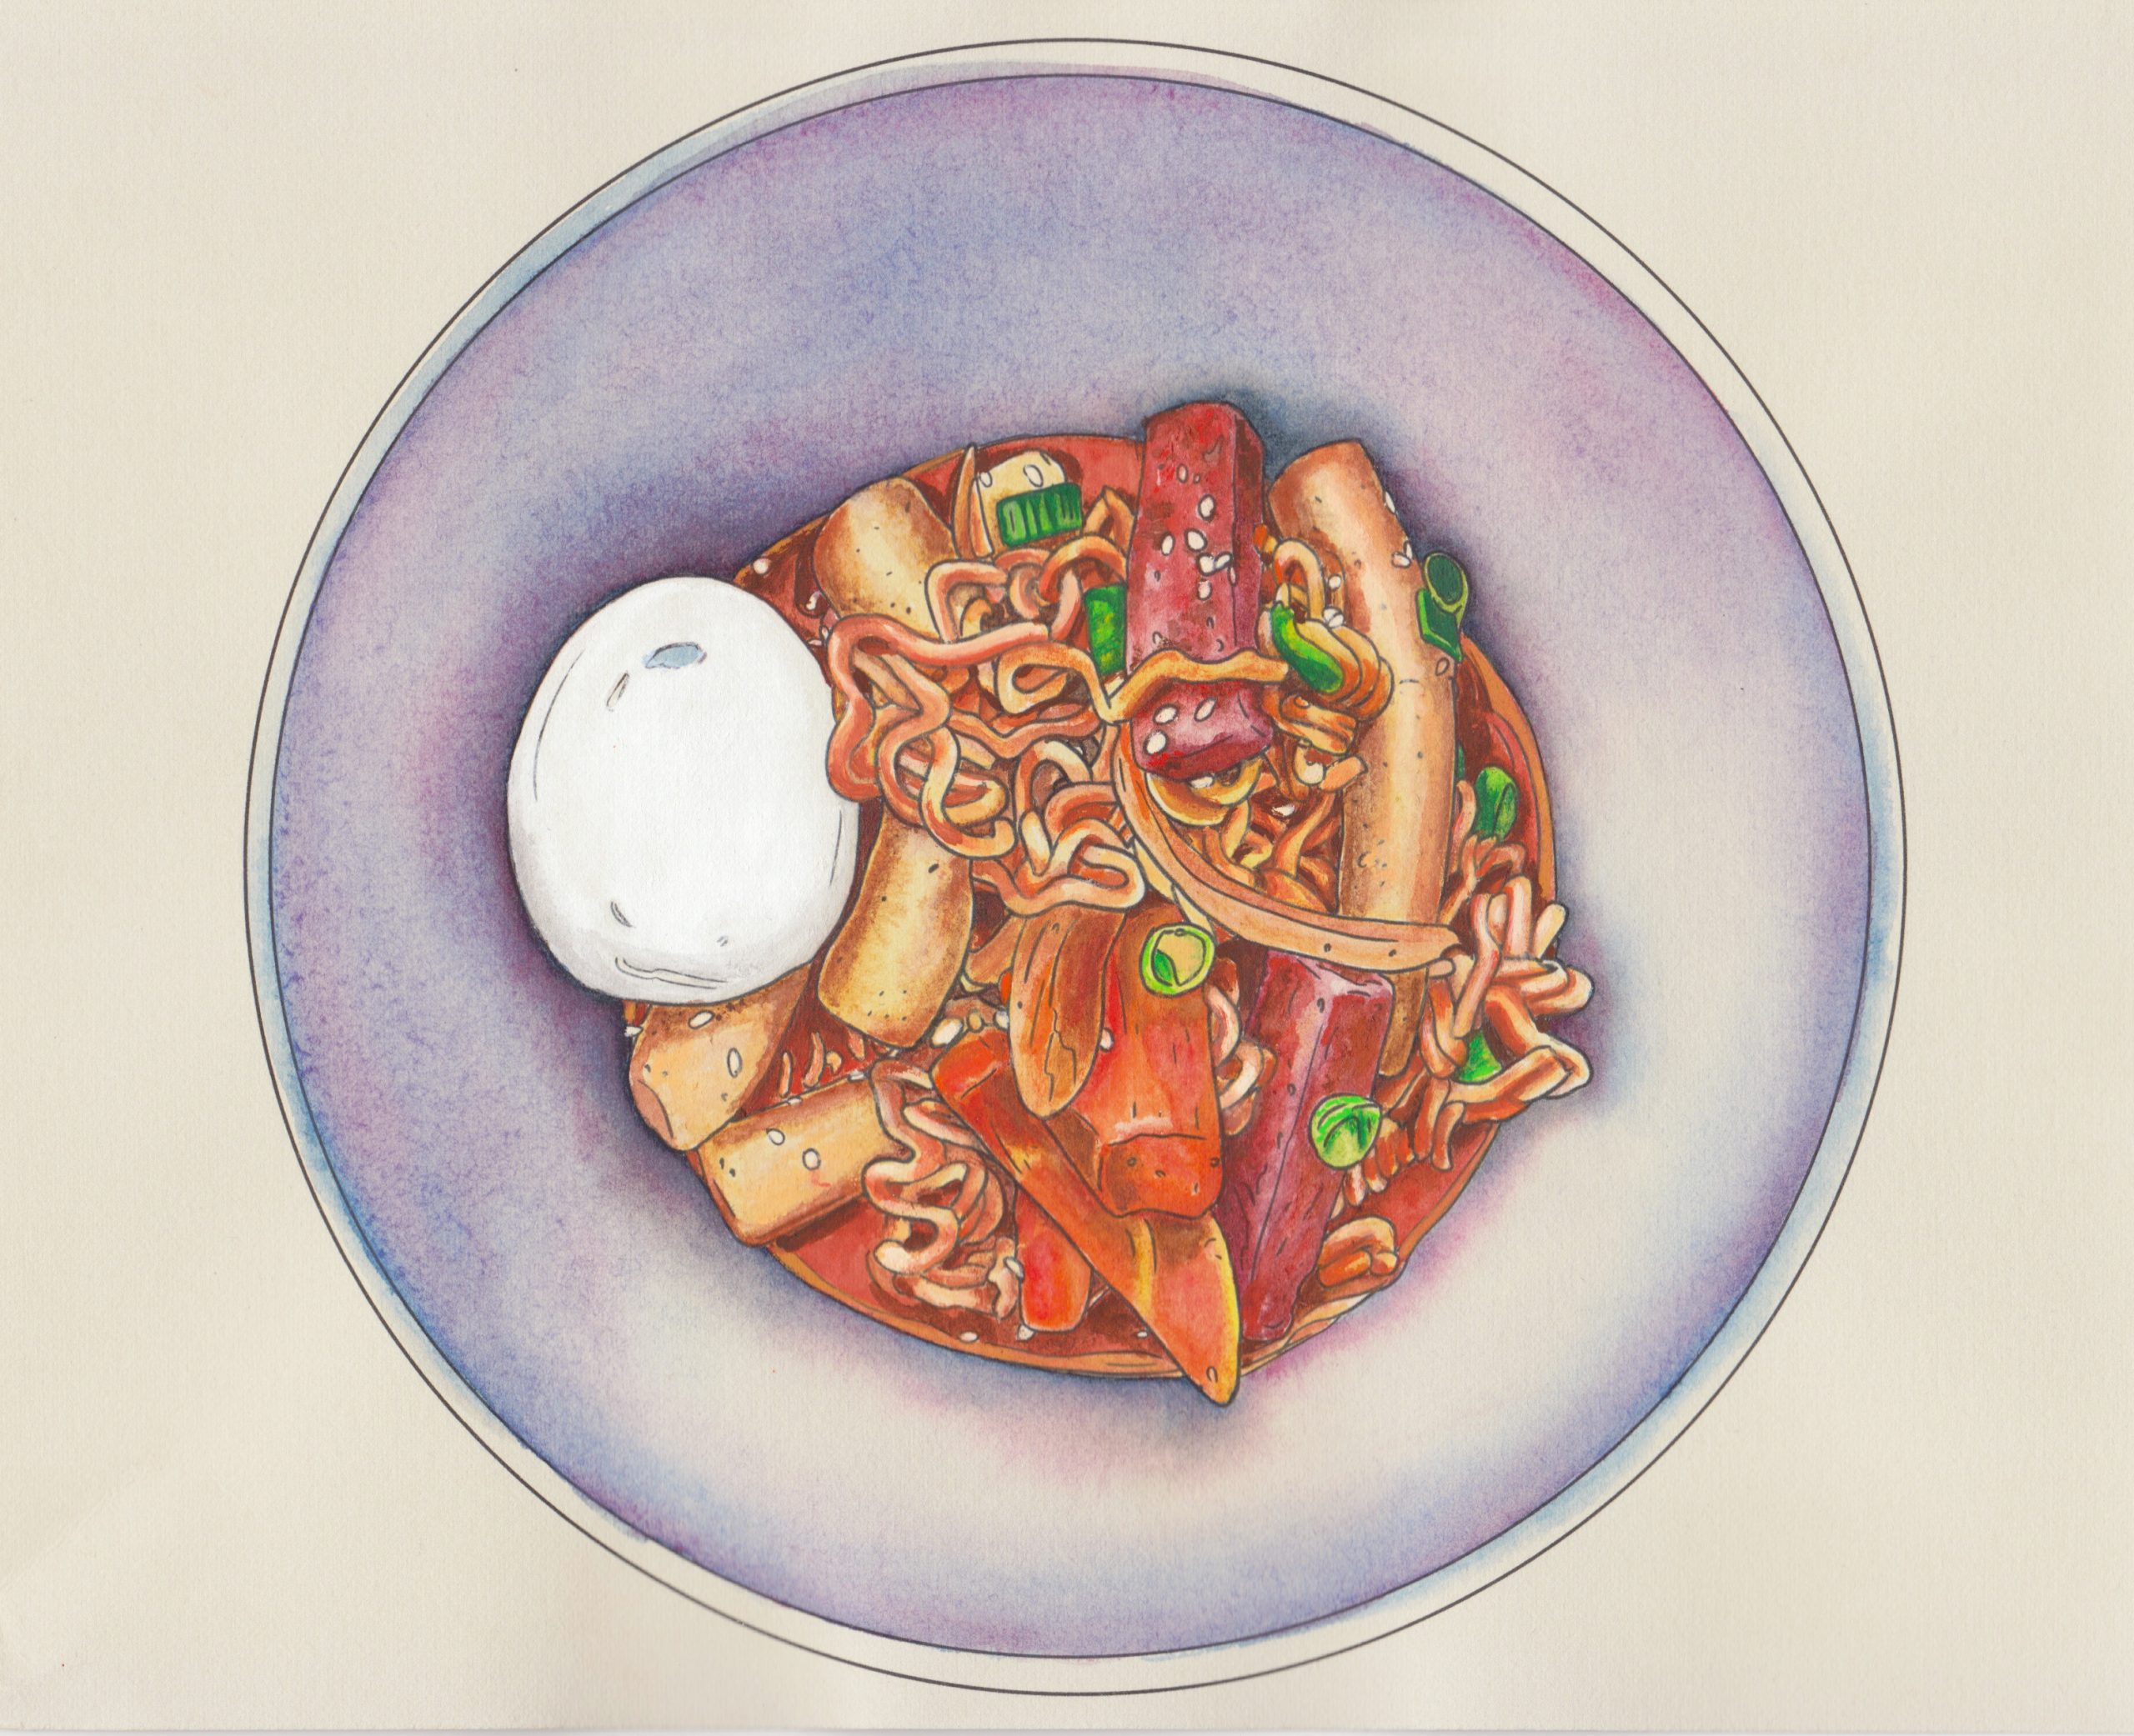 This is an overhead view of a bowl filled with ddukbokki that is precisely drawn using contour lines and washes of color with special attention to texture and shading. The shadows of the deep rounded soup bowl are rendered in purple washes and the background of the composition is the white of the paper. A hardboiled egg sits on the left side of the bowl as ramen noodles intermix with the thick cylinder-shaped dduk (Korean rice cake) coated in a red sauce. Slices of SPAM and onion pop through. The dish is garnished with sesame seeds and sliced scallions. 